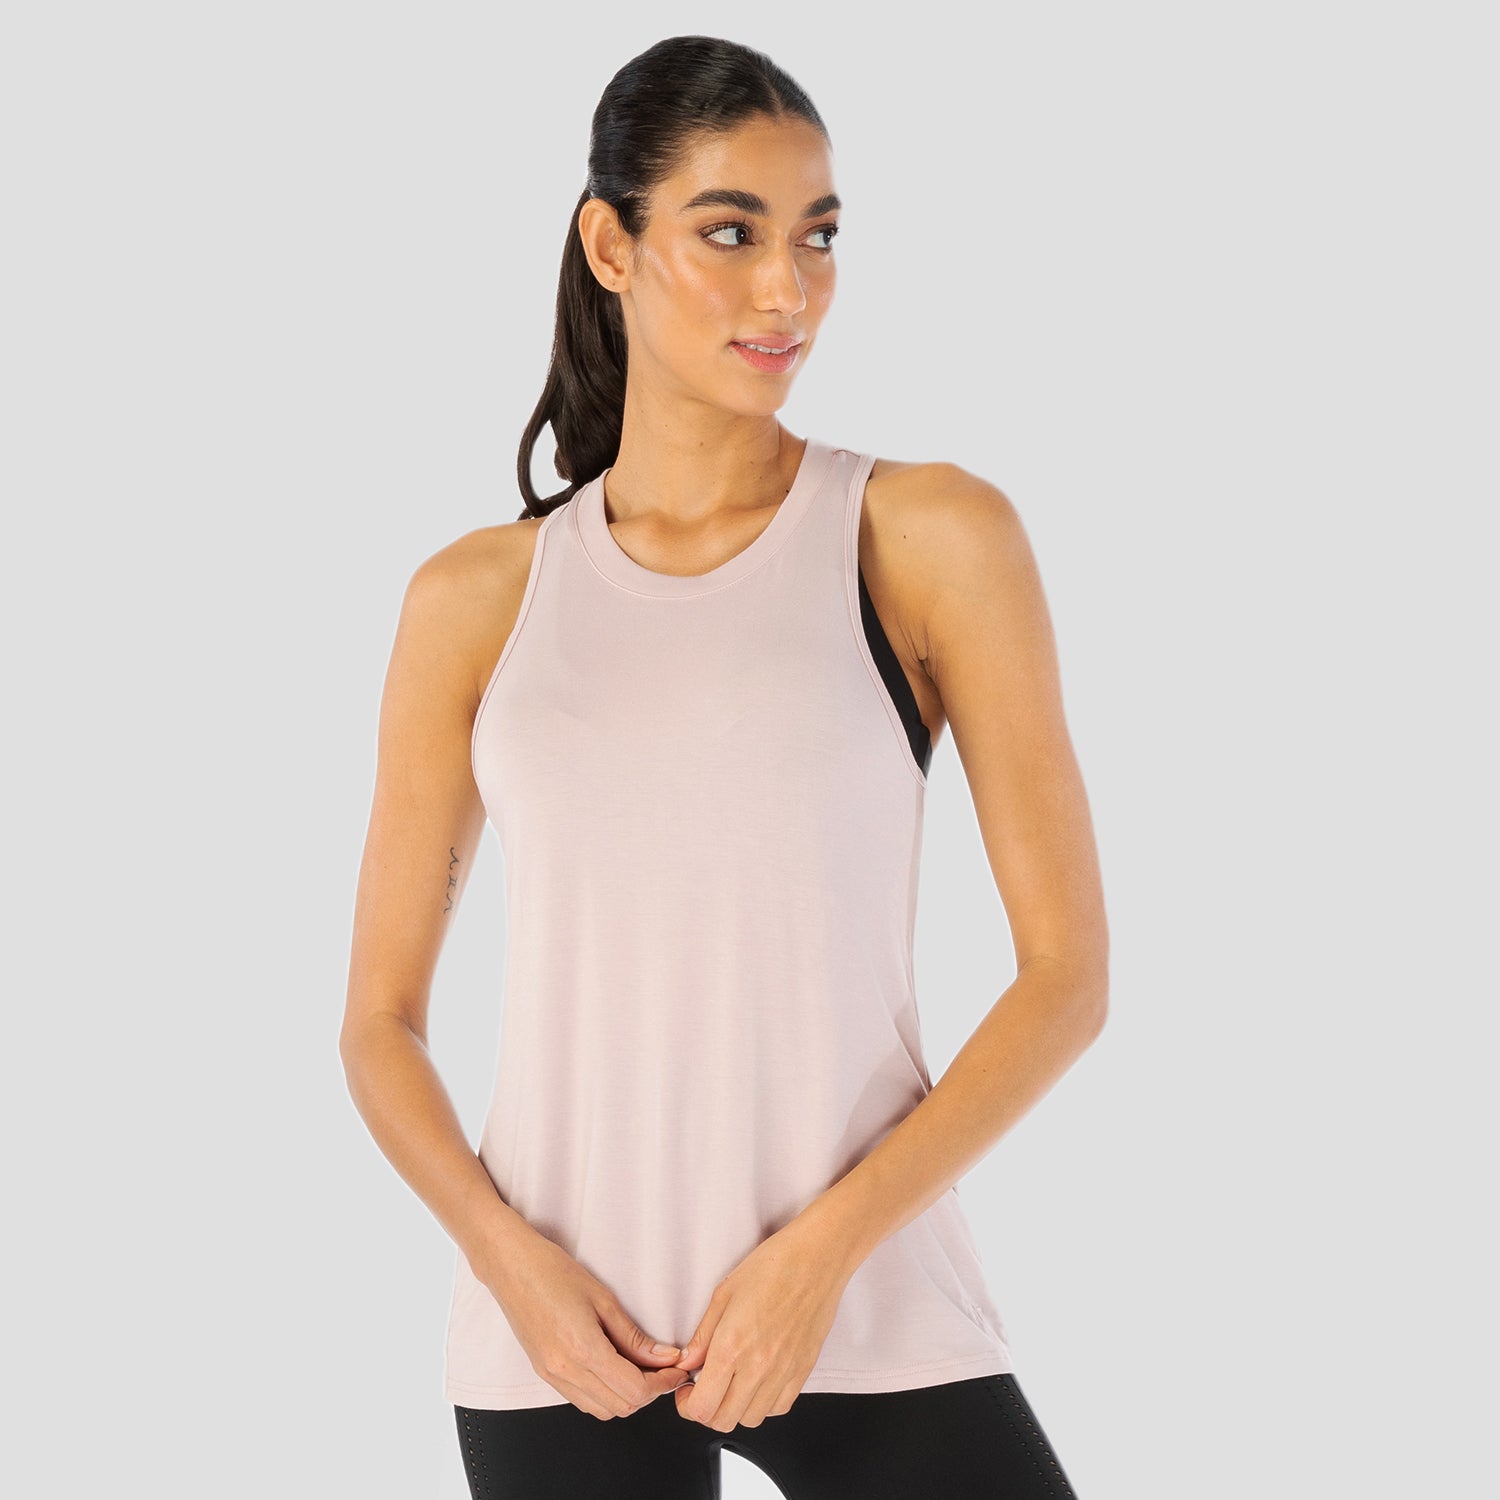 AE, Workout Tank Tops for Women